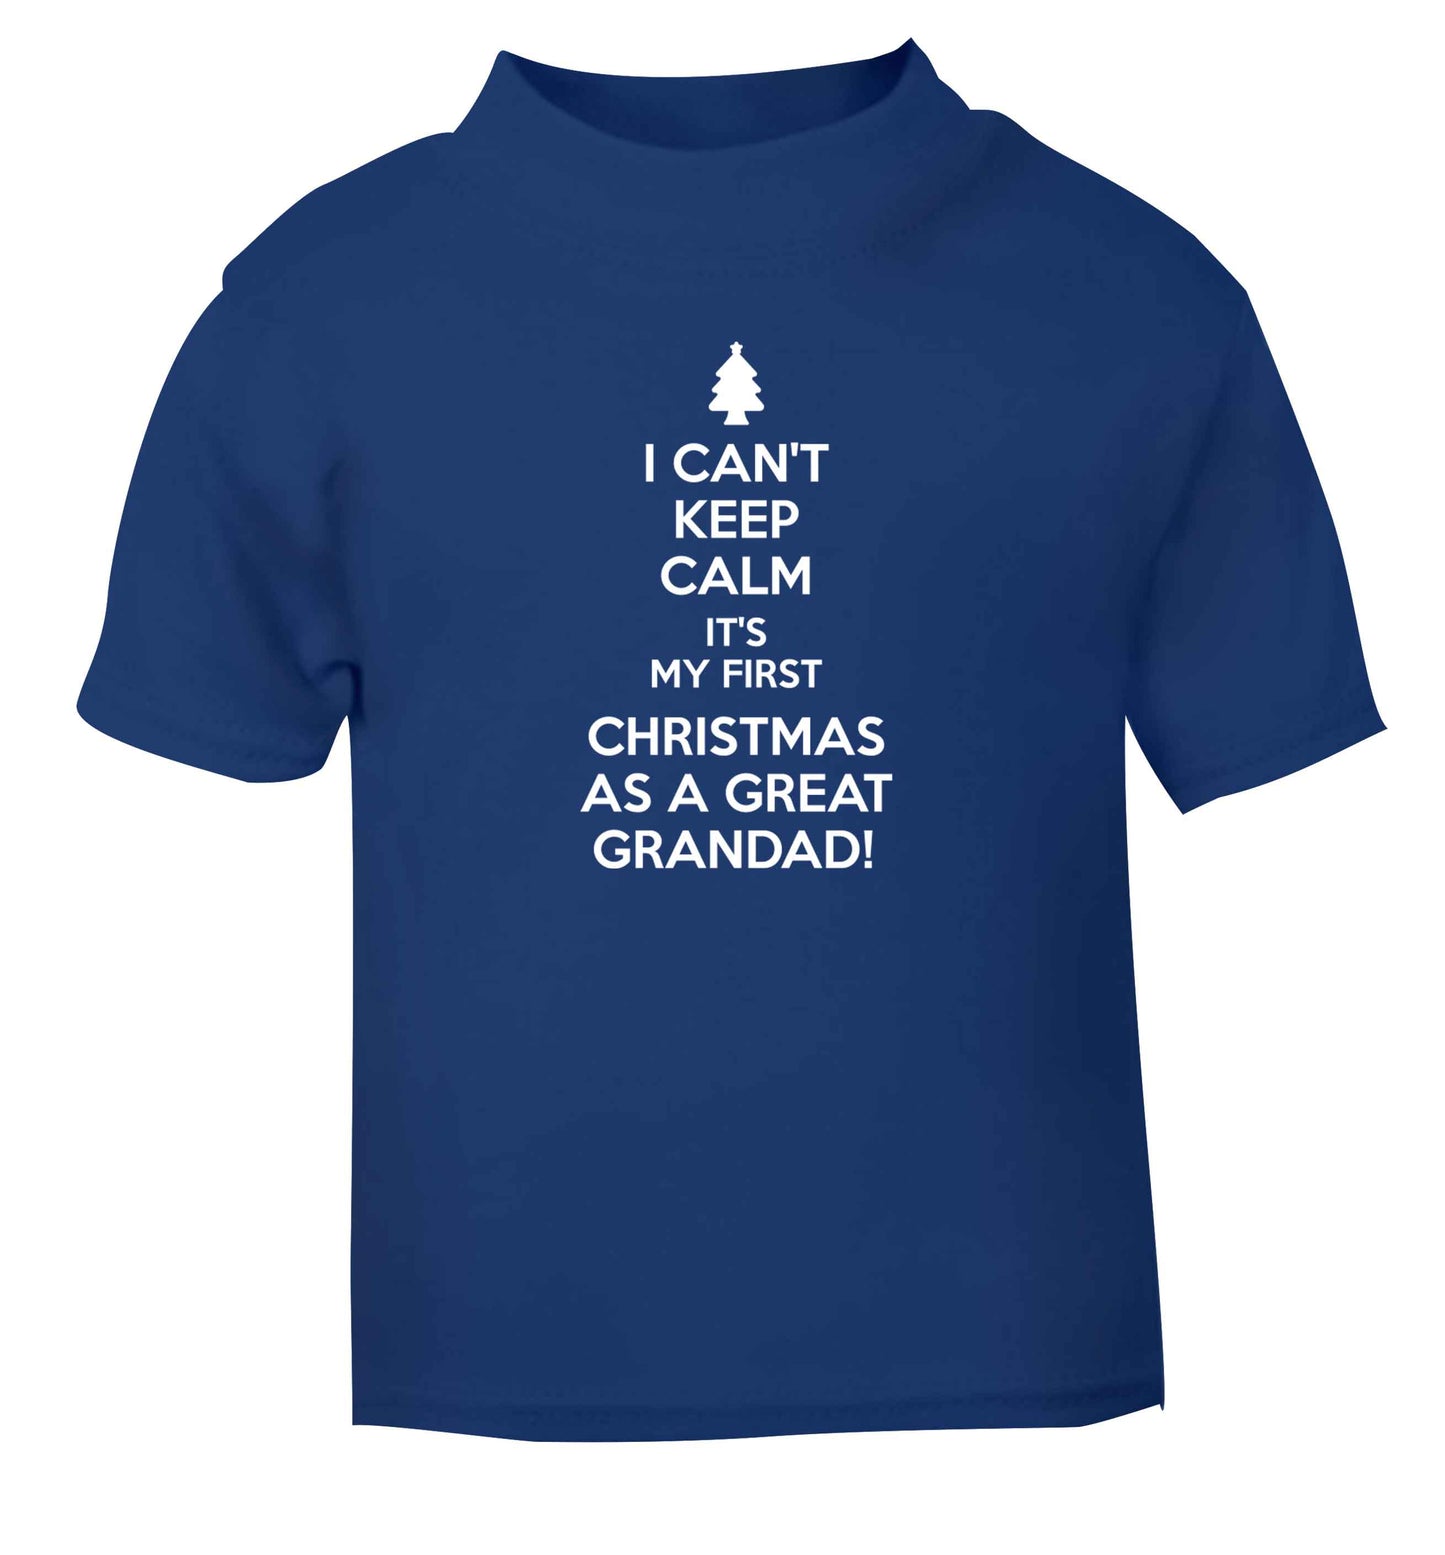 I can't keep calm it's my first Christmas as a great grandad! blue Baby Toddler Tshirt 2 Years